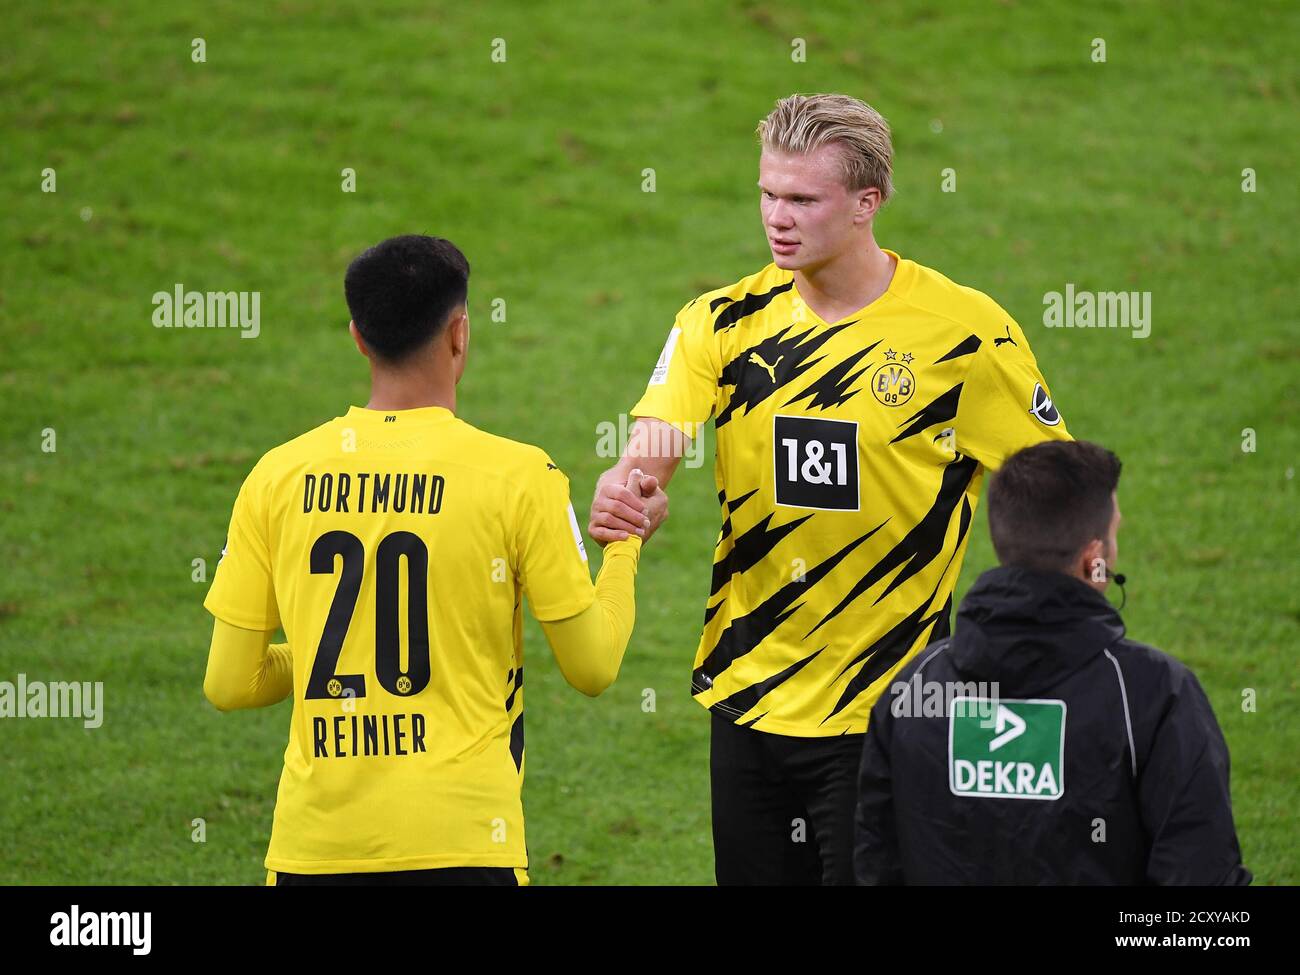 Allianz Arena Munich Germany 30.09.20, Football: German SUPERCUP FINALE 2020/2021, FC Bayern Muenchen (FCB, red) vs Borussia Dortmund  (BVB, yellow) 3:2 — Erling Haaland goes,  Jesus Reinier comes (both BVB) Foto: Markus Ulmer/Pressefoto Ulmer/Pool/via Kolvenbach  DFL regulations prohibit any use of photographs as image sequences and/or quasi-video. Stock Photo